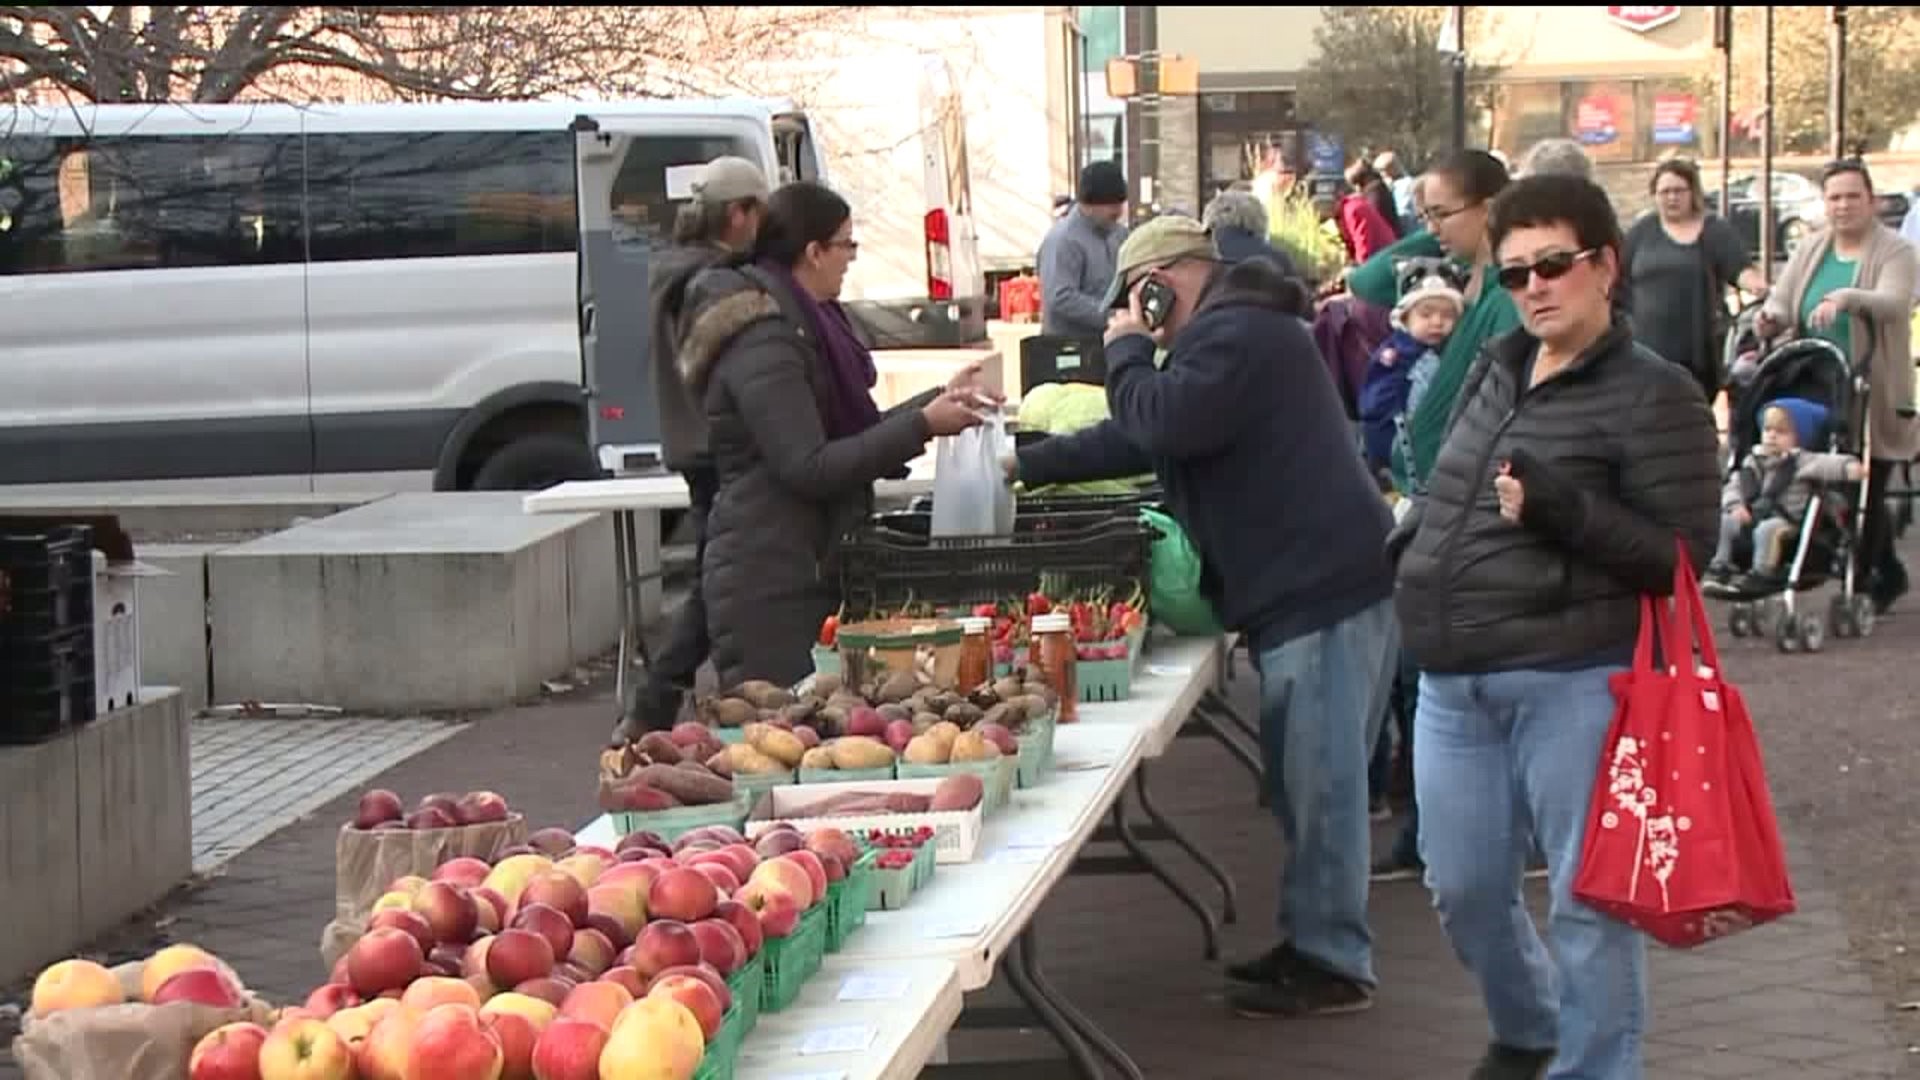 Wilkes-Barre Farmers Market Closes for the Season